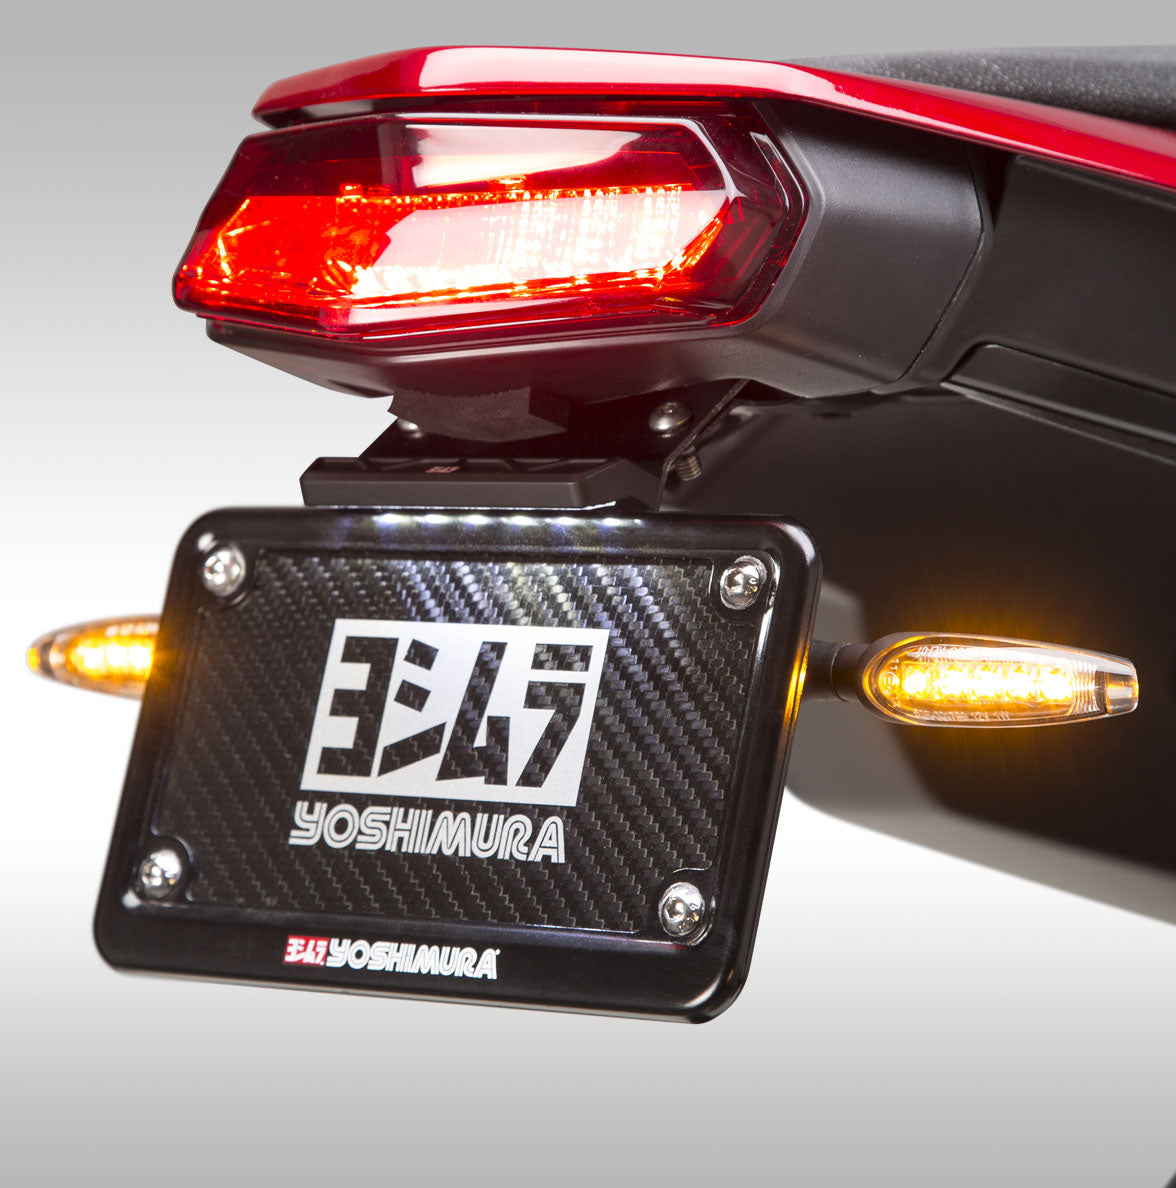 Clean up the rear fender of your Tenere 700 with the Yoshimura rear fender eliminator kit. Tenere 700 tail tidy kit. Kit incorporates Shrink Solder Connectors and a new and improved weather tight light housing, and brighter DOT compliant LED light. Made in the USA!